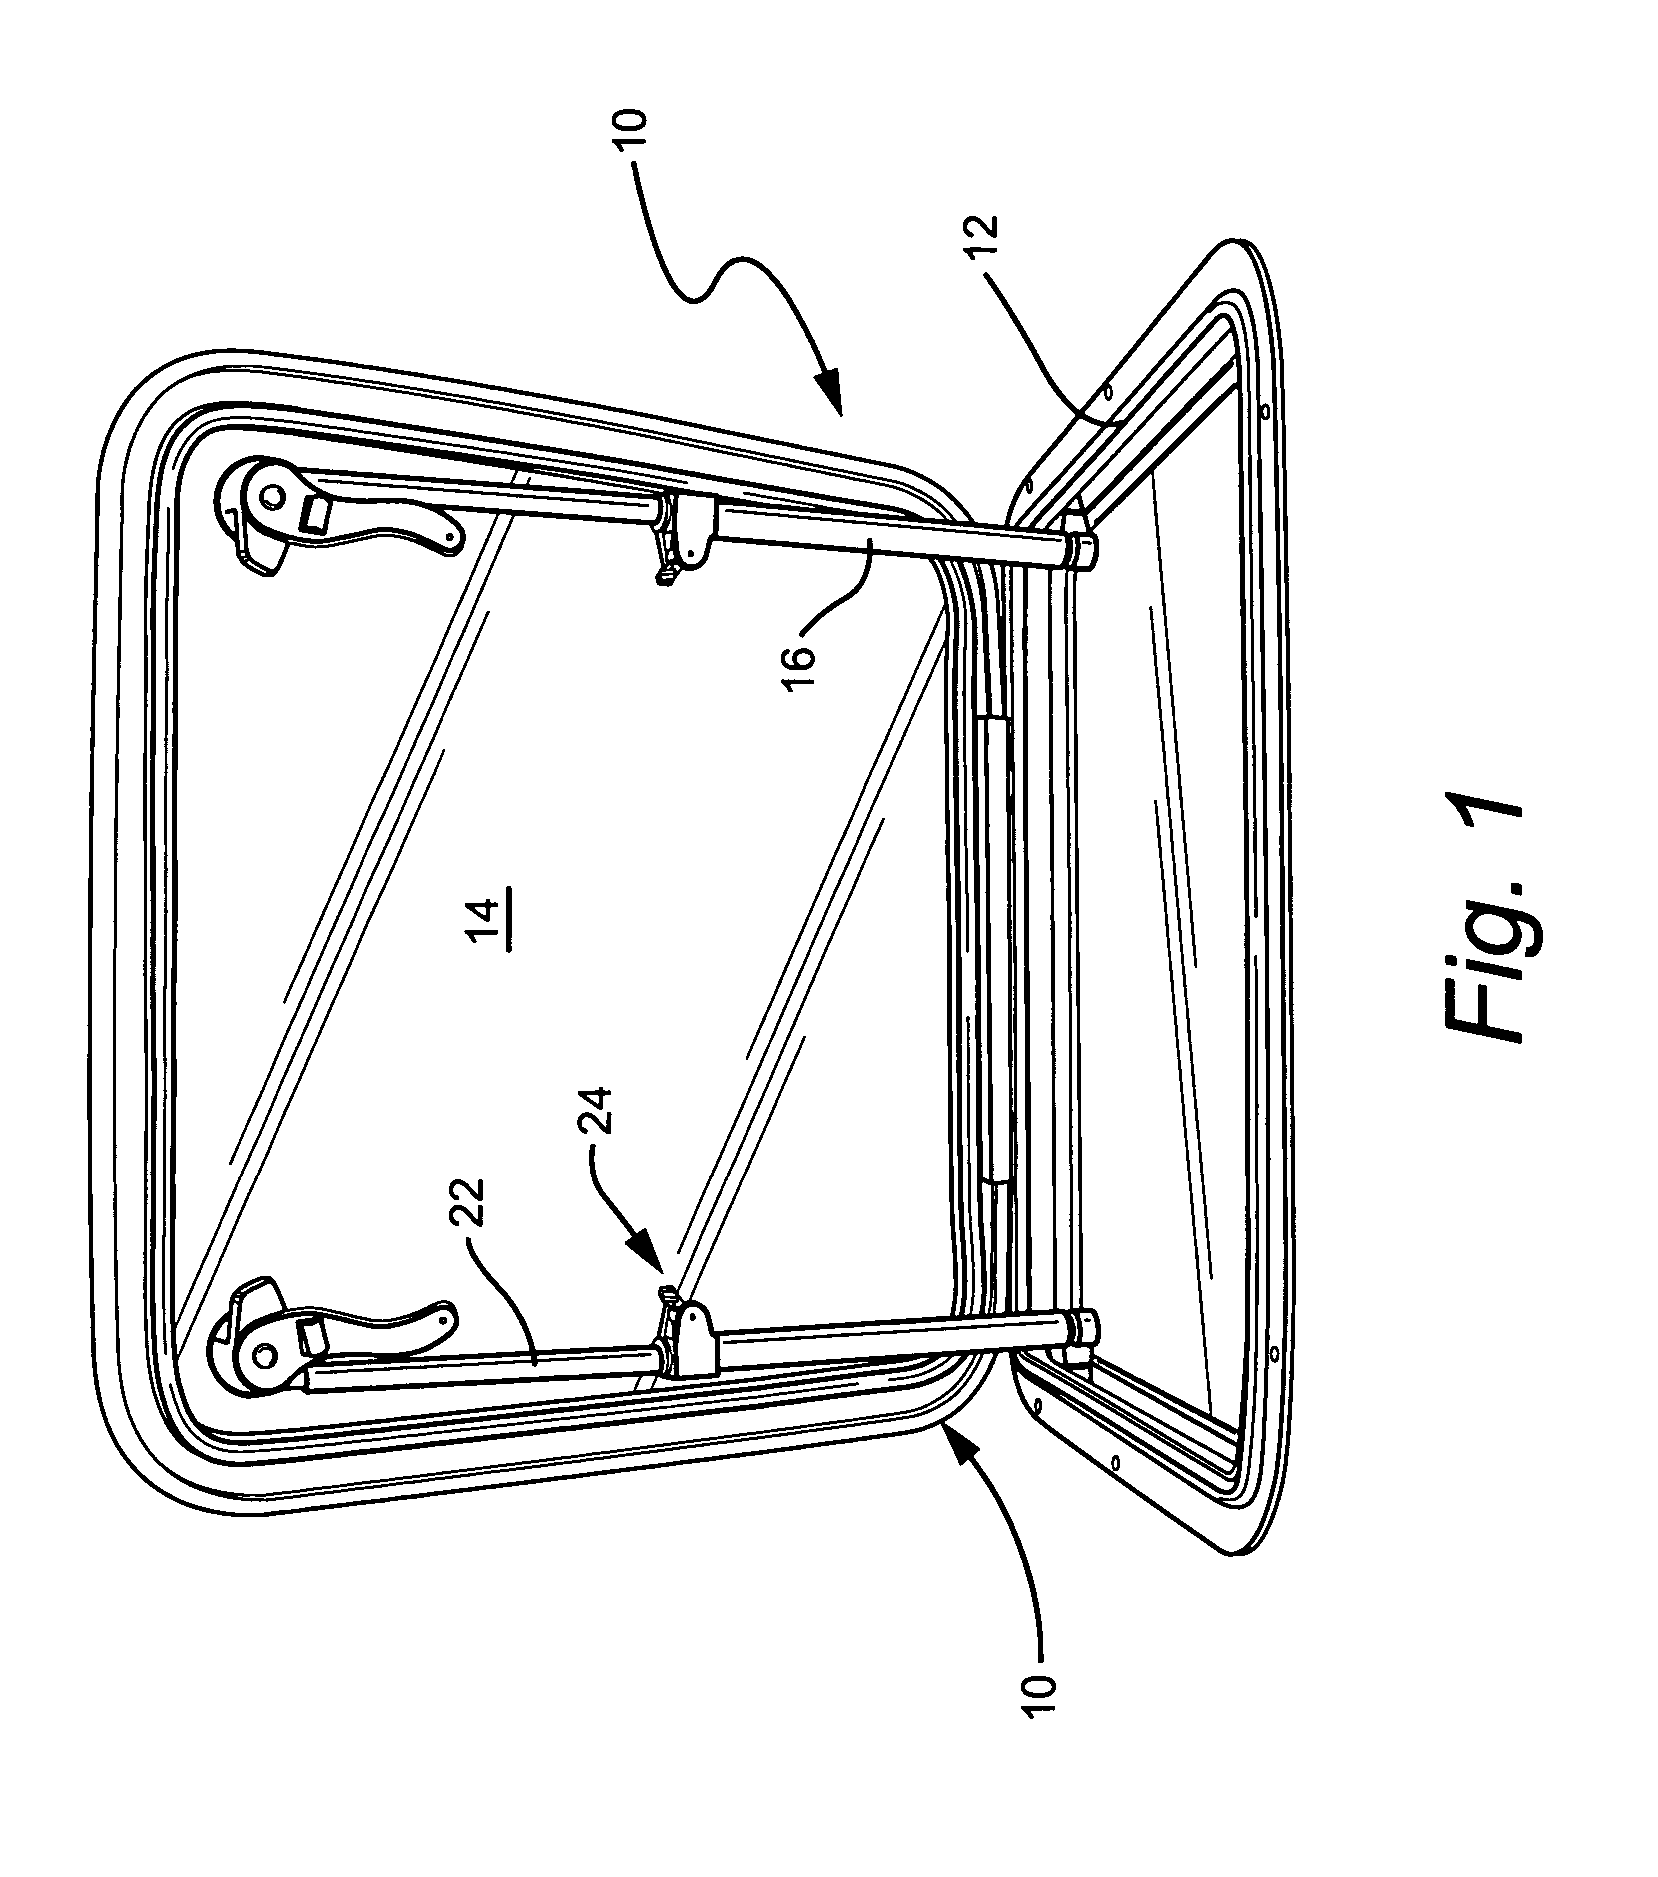 Support bar assembly for deck hatch